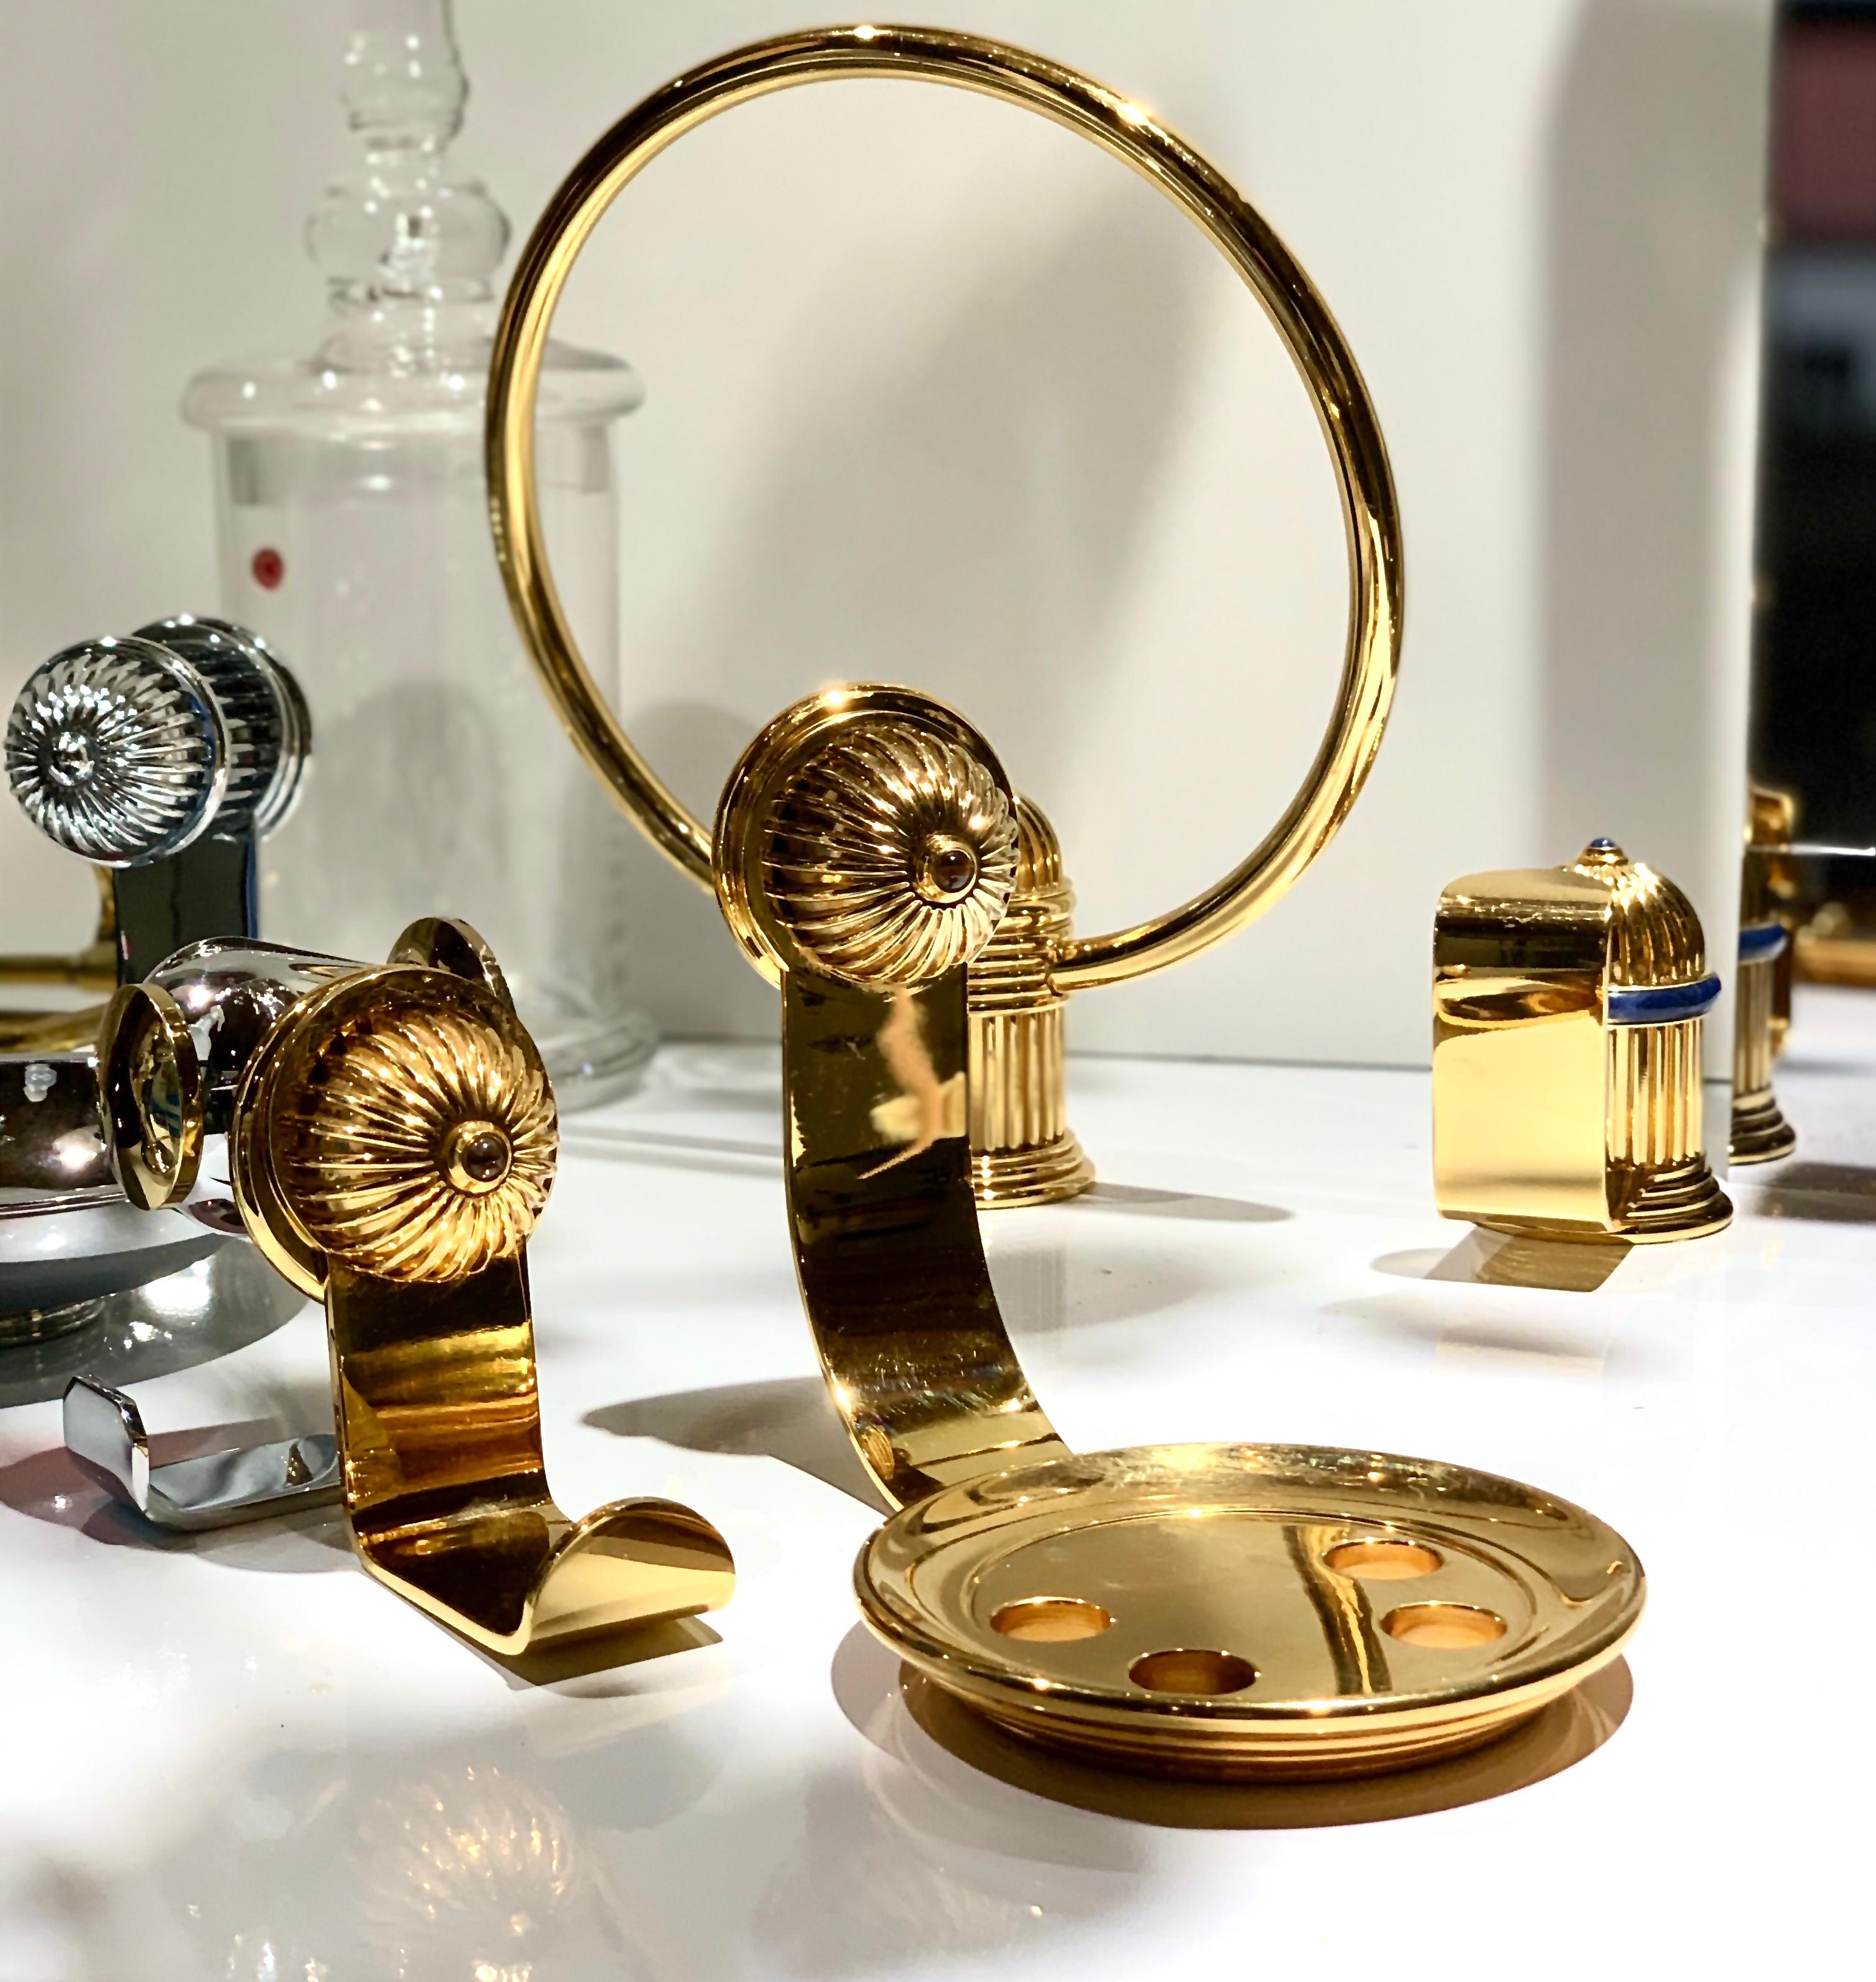 Neoclassical Revival Polished Gold and Tiger’s Eye Toothbrush Holder and Robe Hook by Serdaneli Paris